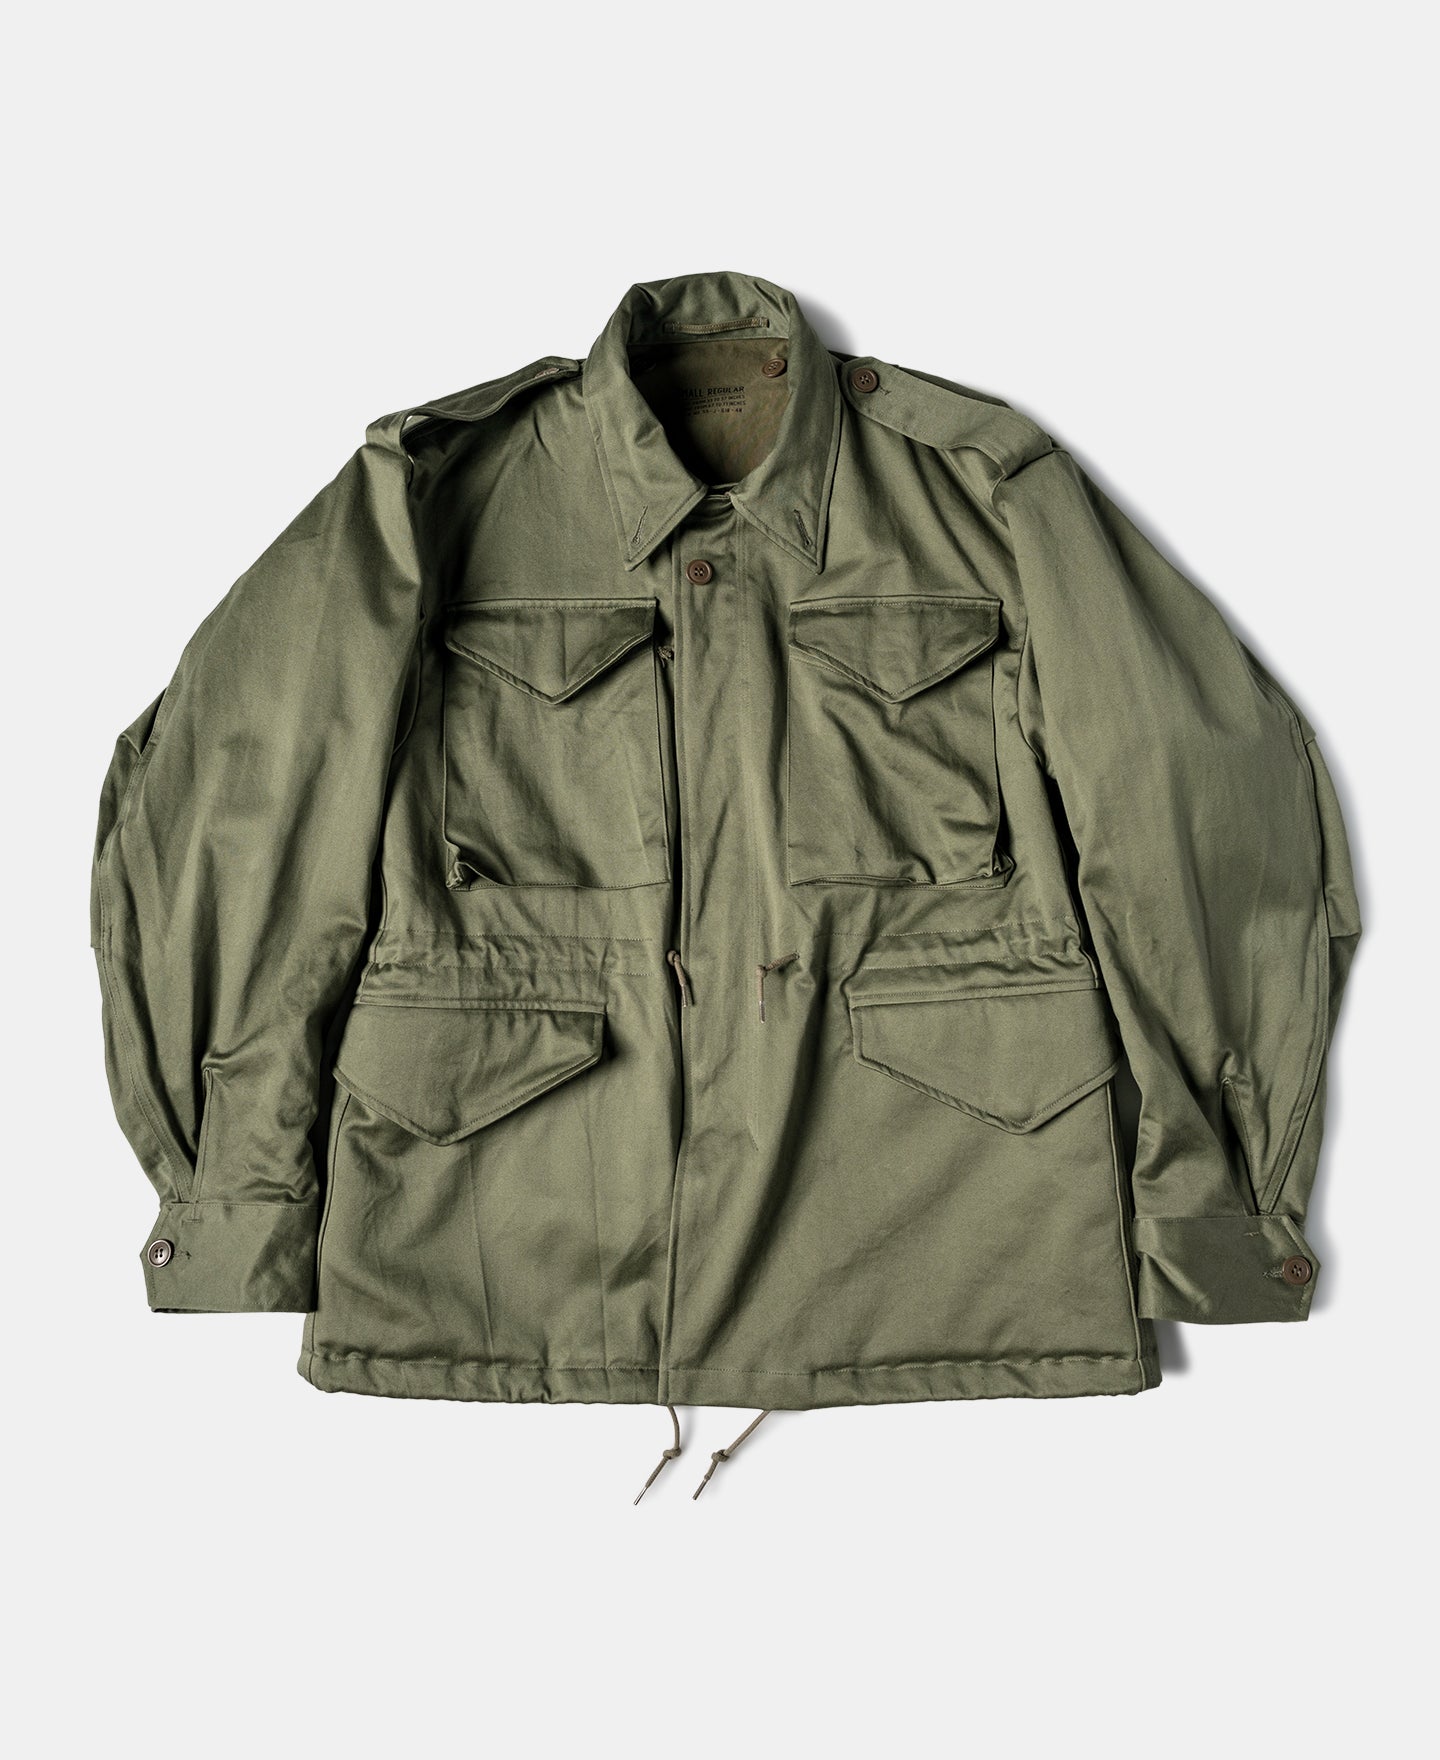 Authentic Apparel Us Armytm Front Line Field Jacket, $124